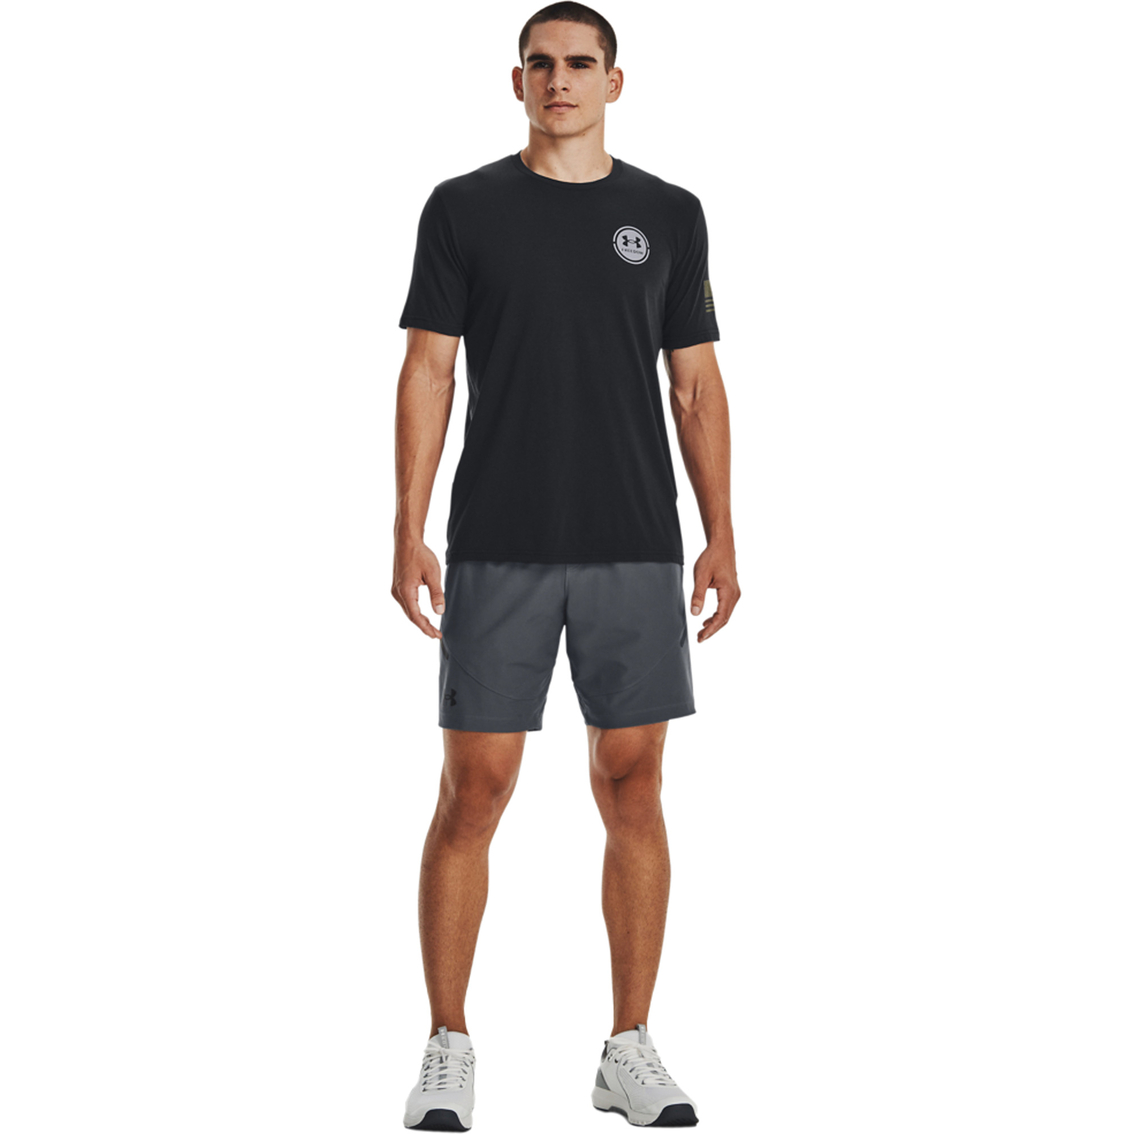 Under Armour Men's Tac Mission Made Tee - Image 3 of 6